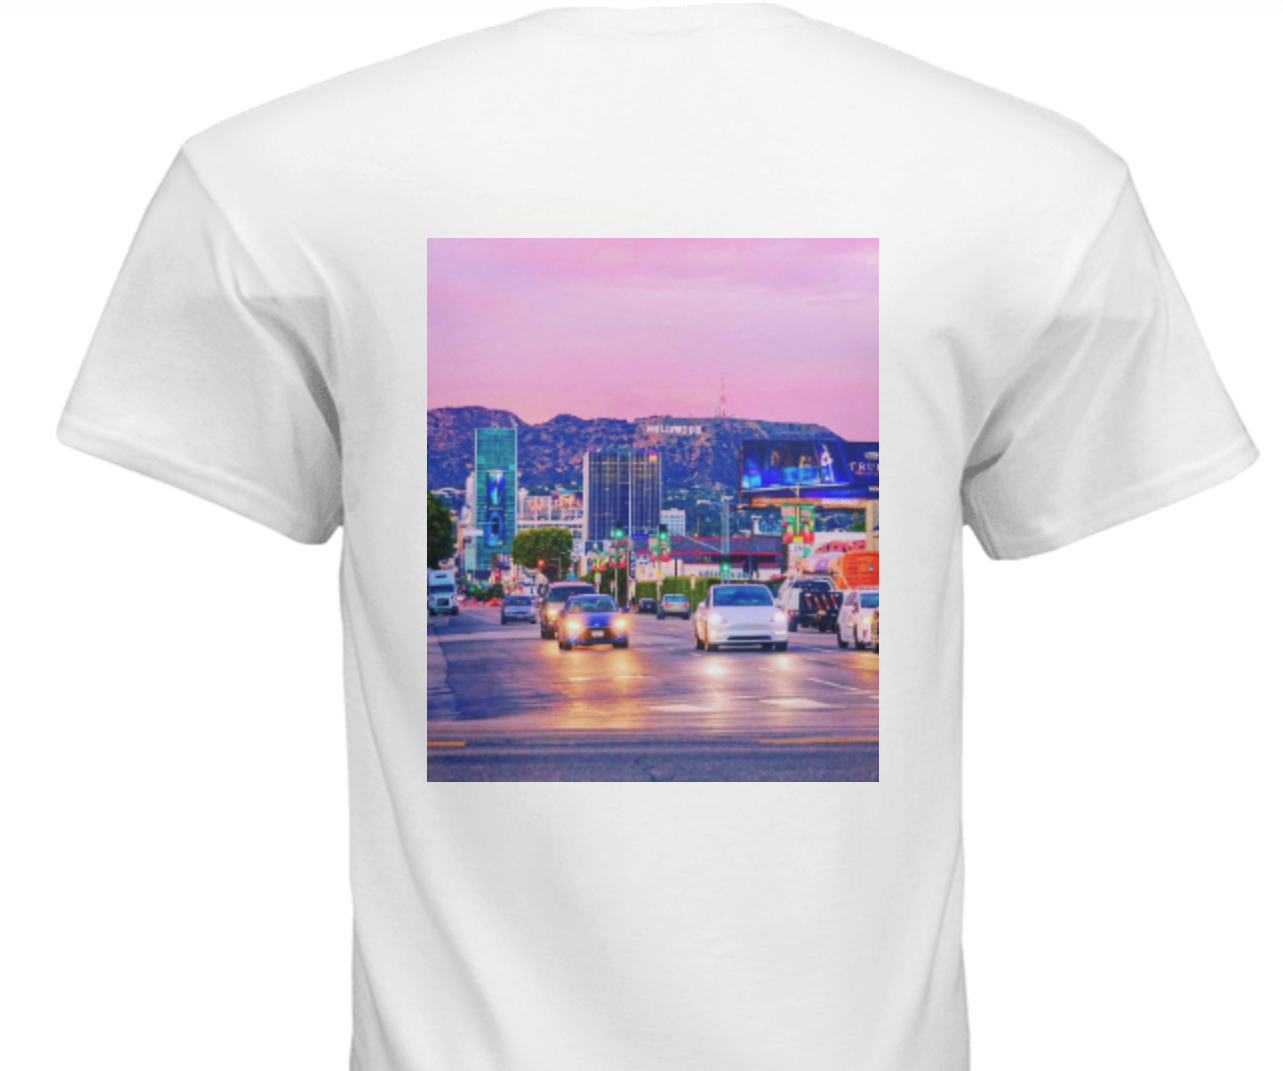 HOLLYWOOD HILL$ SPECIAL EDITION T-SHIRT